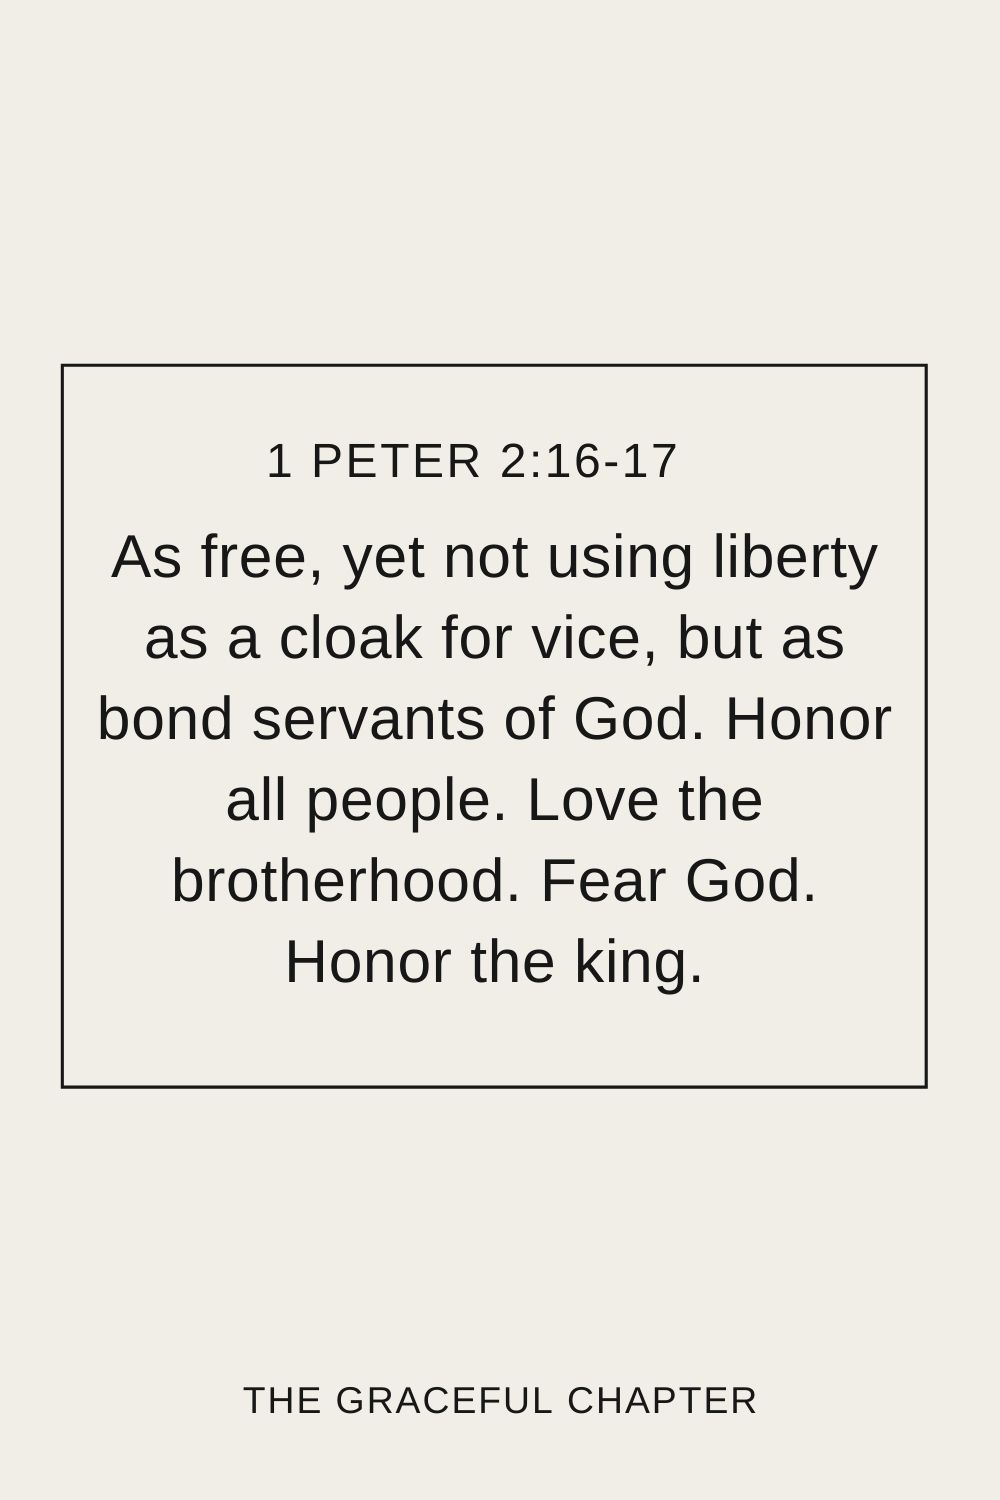 As free, yet not using liberty as a cloak for vice but as bondservants of God. Honor all people. Love the brotherhood. Fear God. Honor the king.